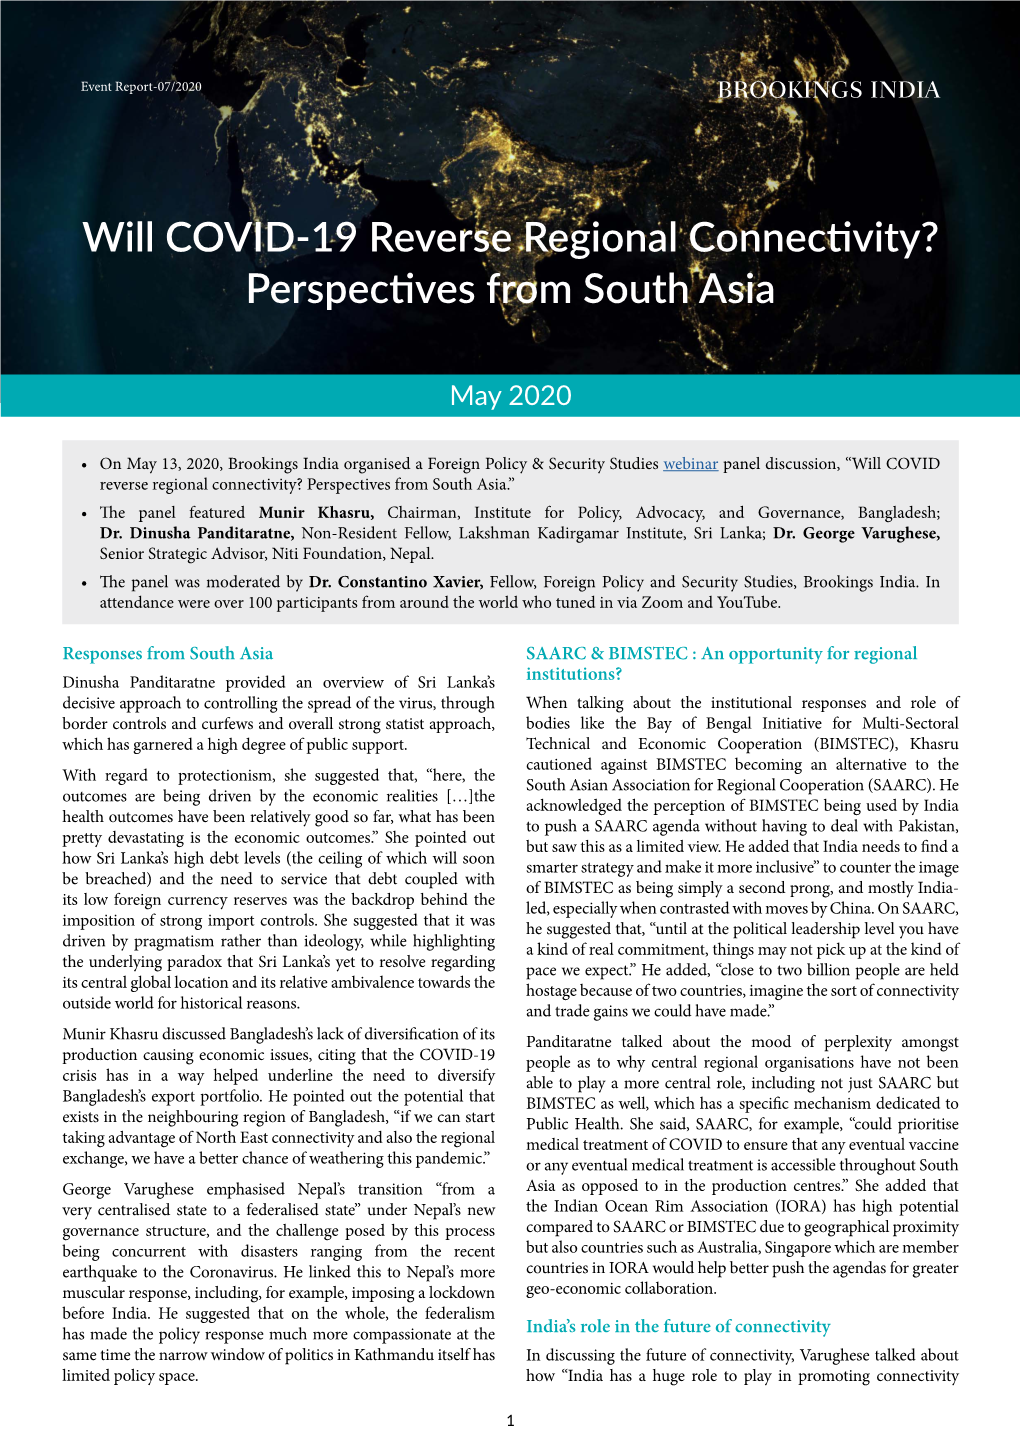 Will COVID-19 Reverse Regional Connectivity? Perspectives from South Asia